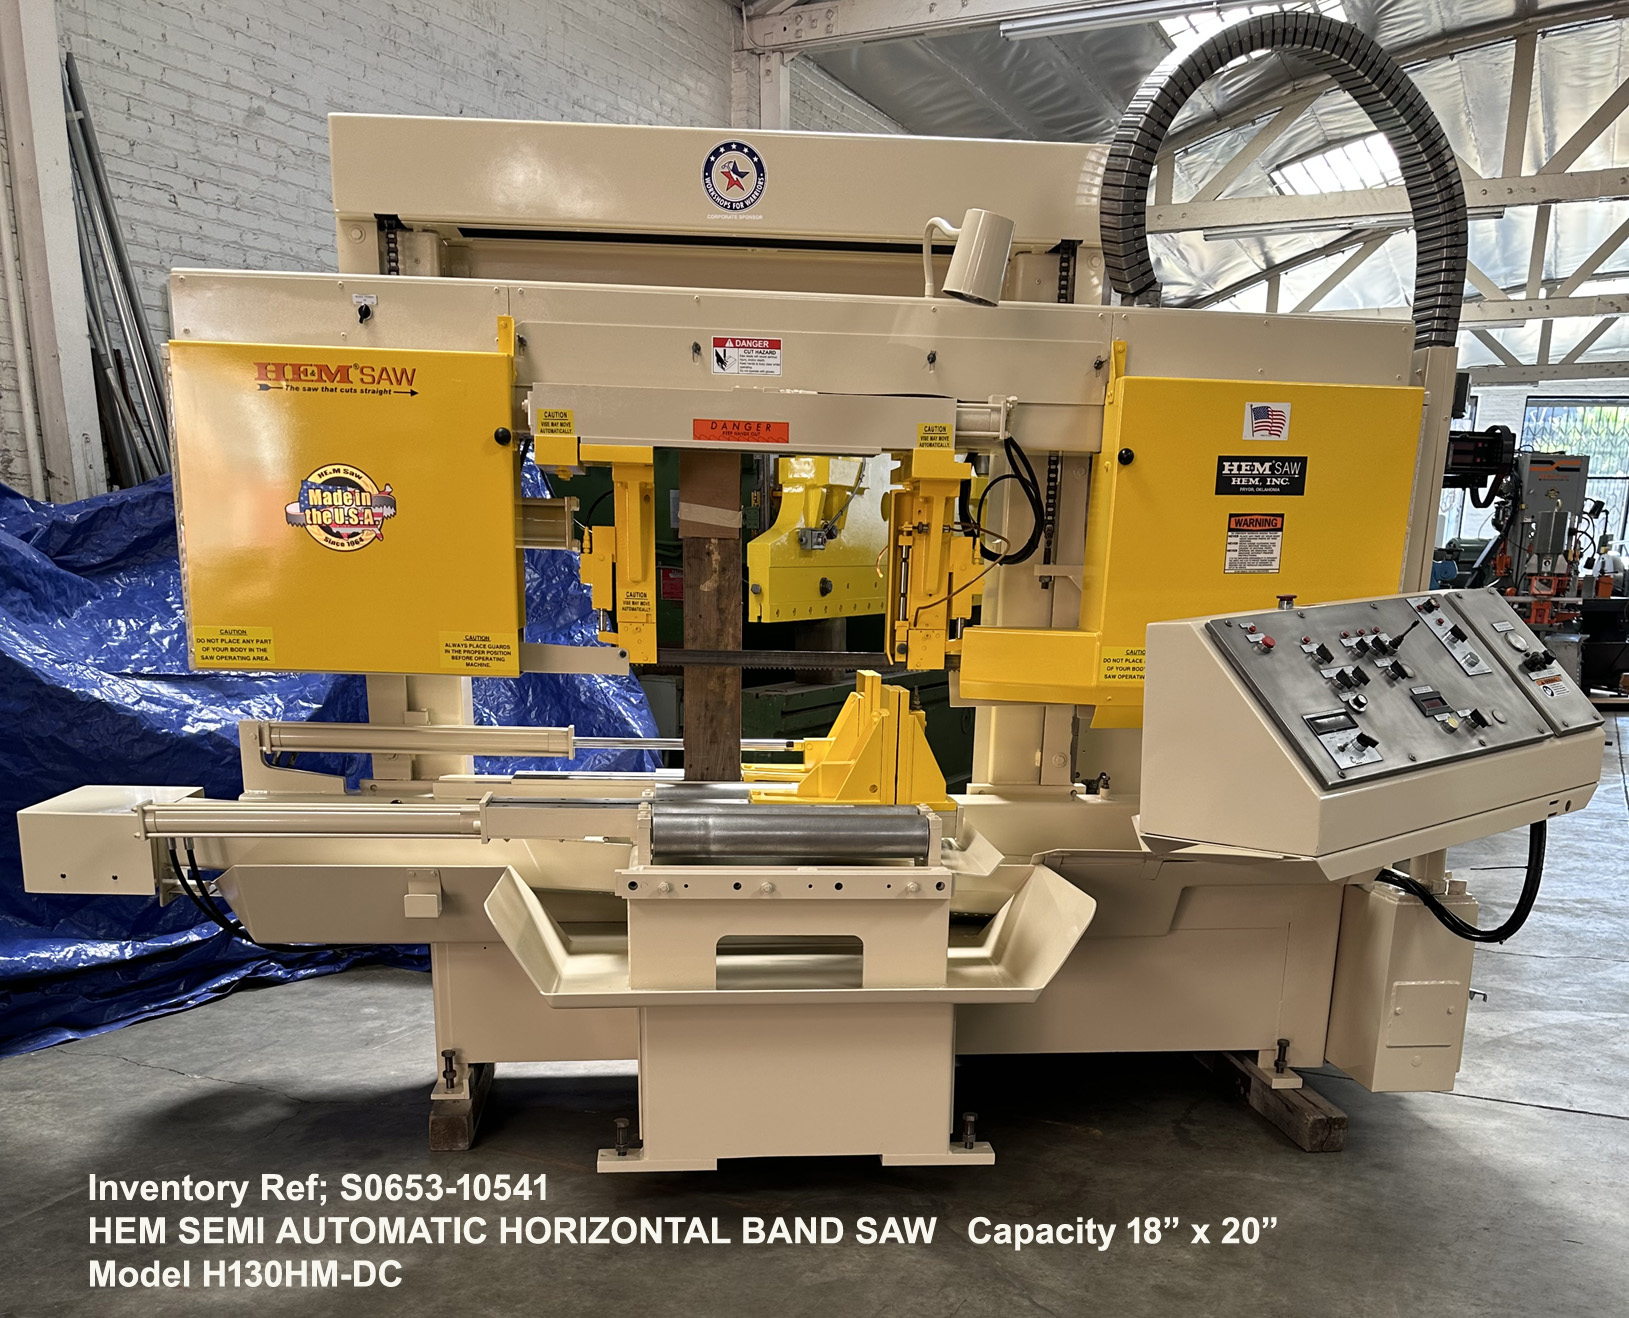 Hem H130HM-DC Horizontal Band Saw Capacity 18 inch height x 20 inch width, Blade Speeds 72 thru 400 fpm, Hydraulic Down Feed, Vise, & Blade Tension, Drive 10-hp, Blade Width-1.5 inch, Augar, Serial Number 52419, Front, Ref 10541-1